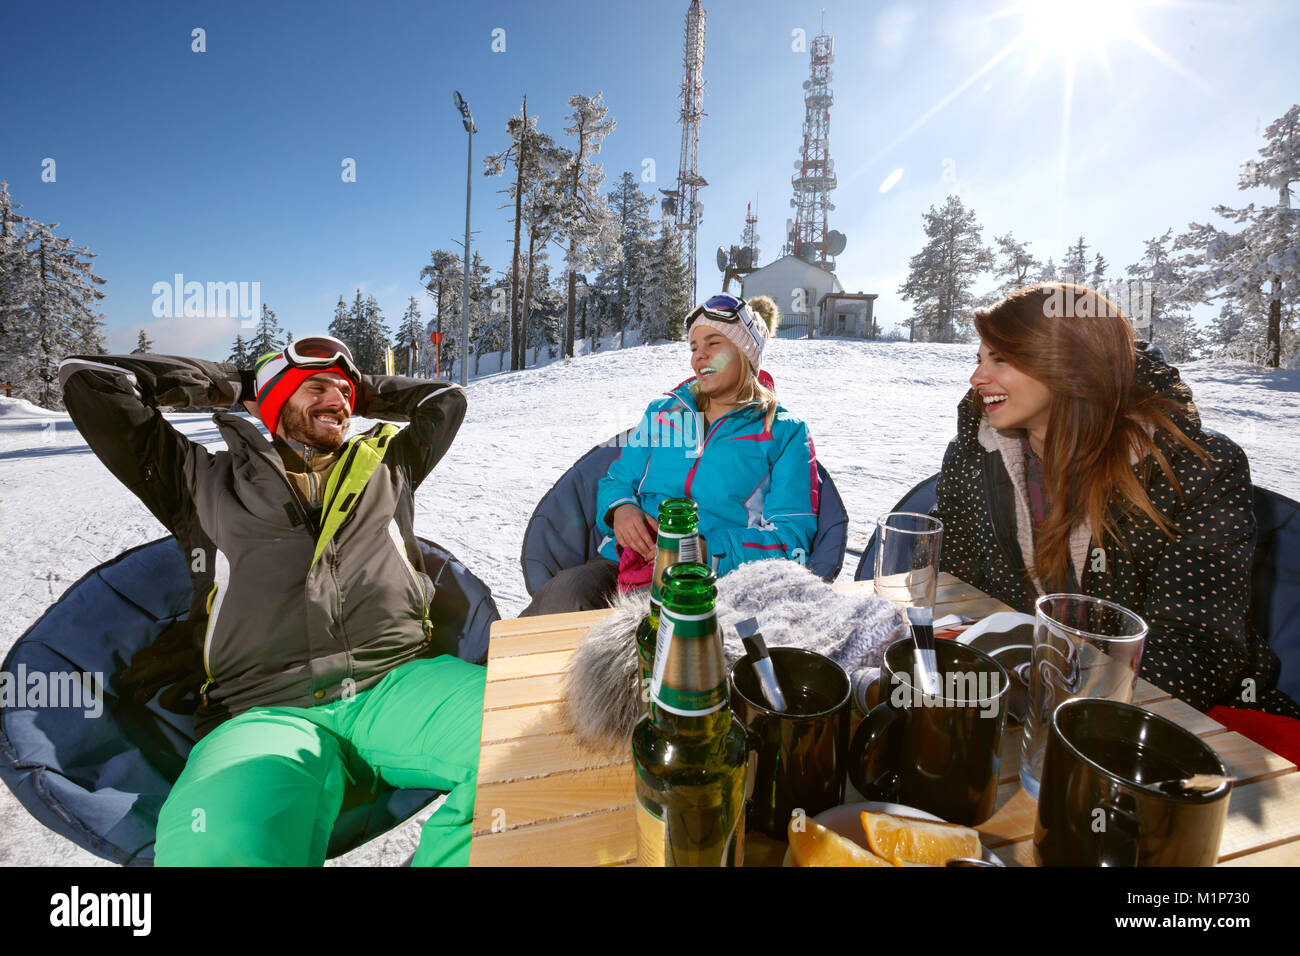 Group skiers enjoying together in cafe outdoor on ski terrain Stock Photo